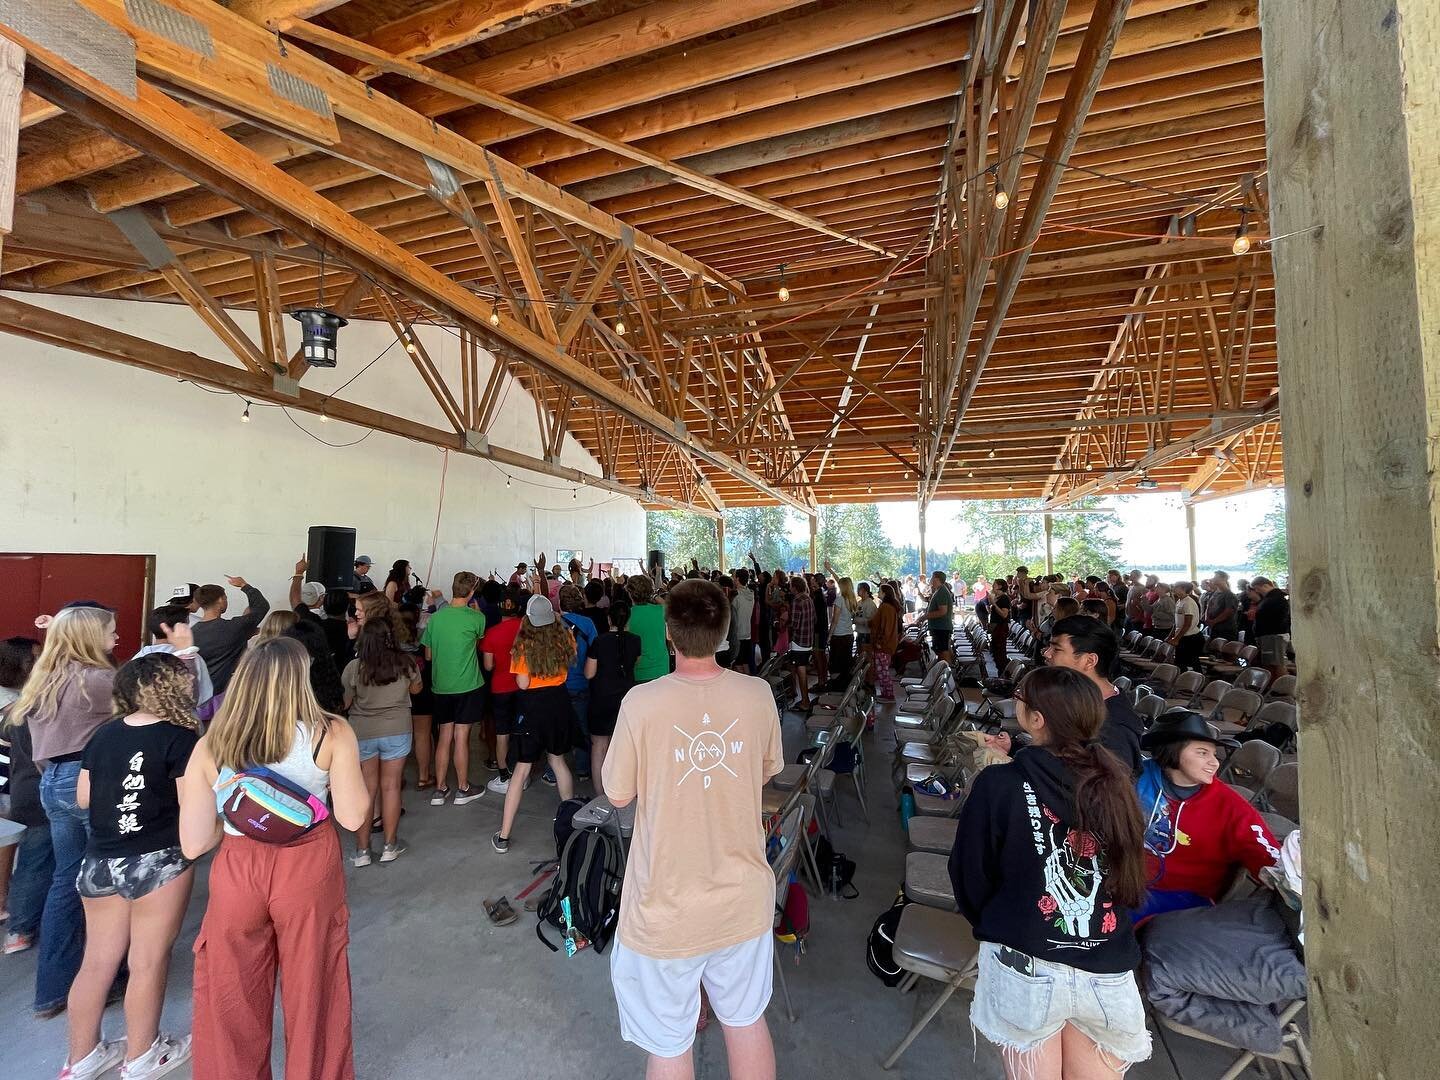 Last worship service at Teen Camp is happening now!!! What a blessing this week has been! Thanks too all who made it possible. We want to encourage you all to follow up with your teens when they get back about the work and calling of God in their liv